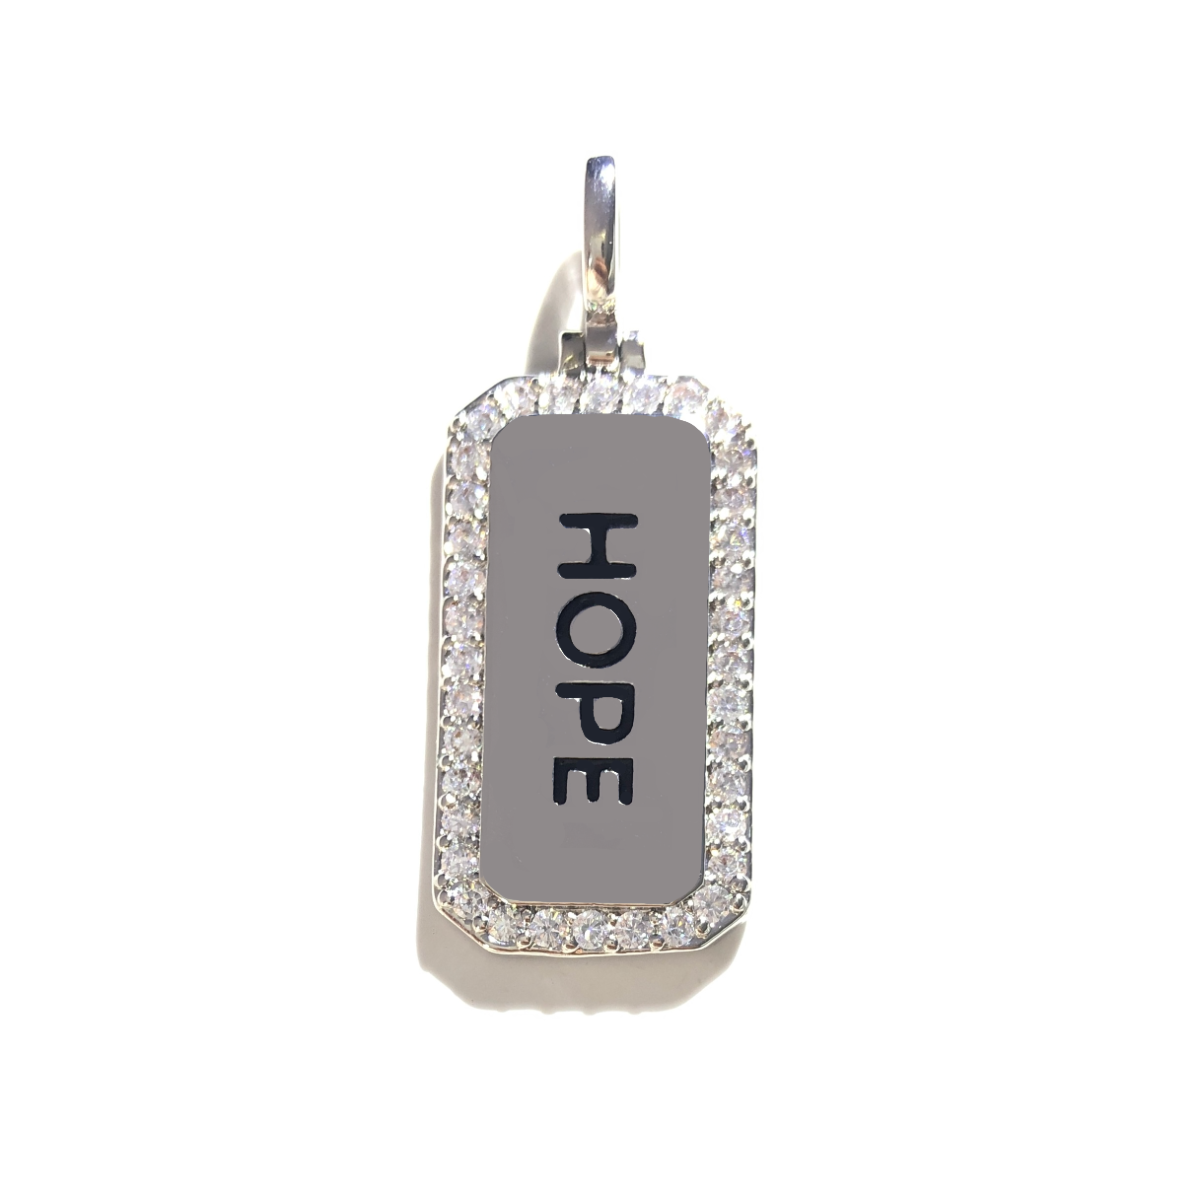 10pcs/lot 38*15mm CZ Paved Hope Word Tags Charms Pendants Silver CZ Paved Charms Christian Quotes New Charms Arrivals Word Tags Charms Beads Beyond